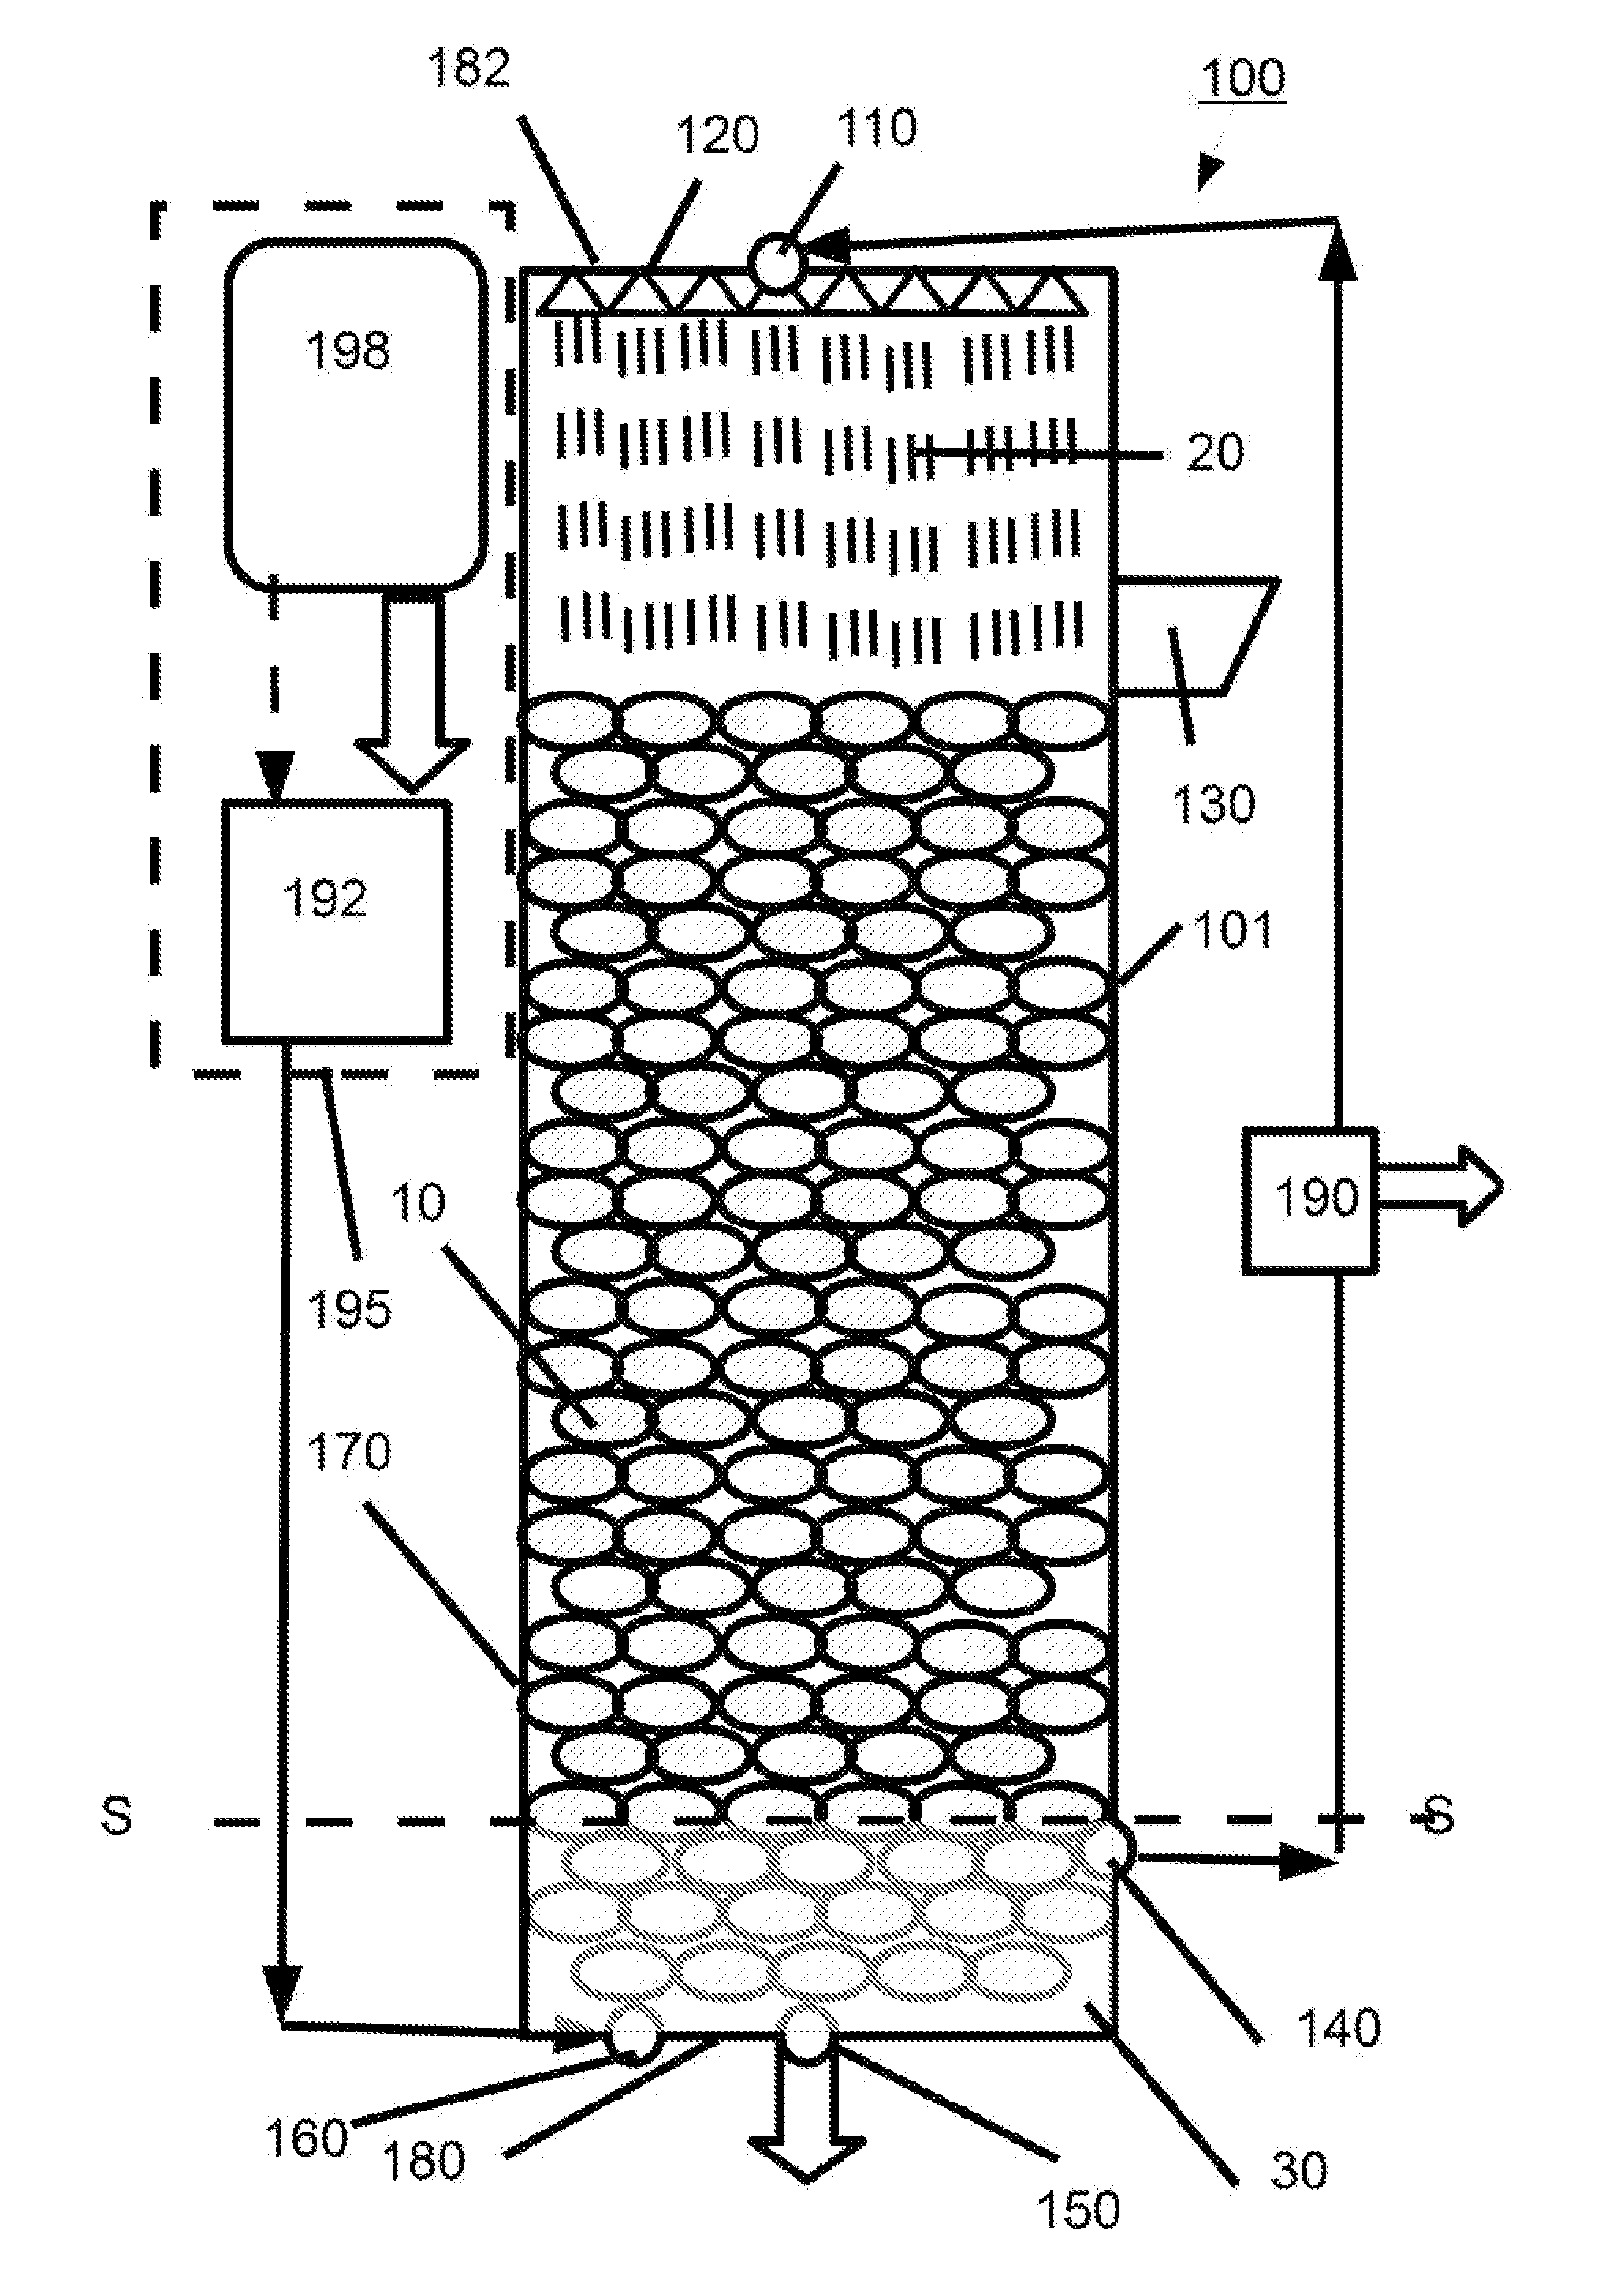 Hydrolysis systems and methods